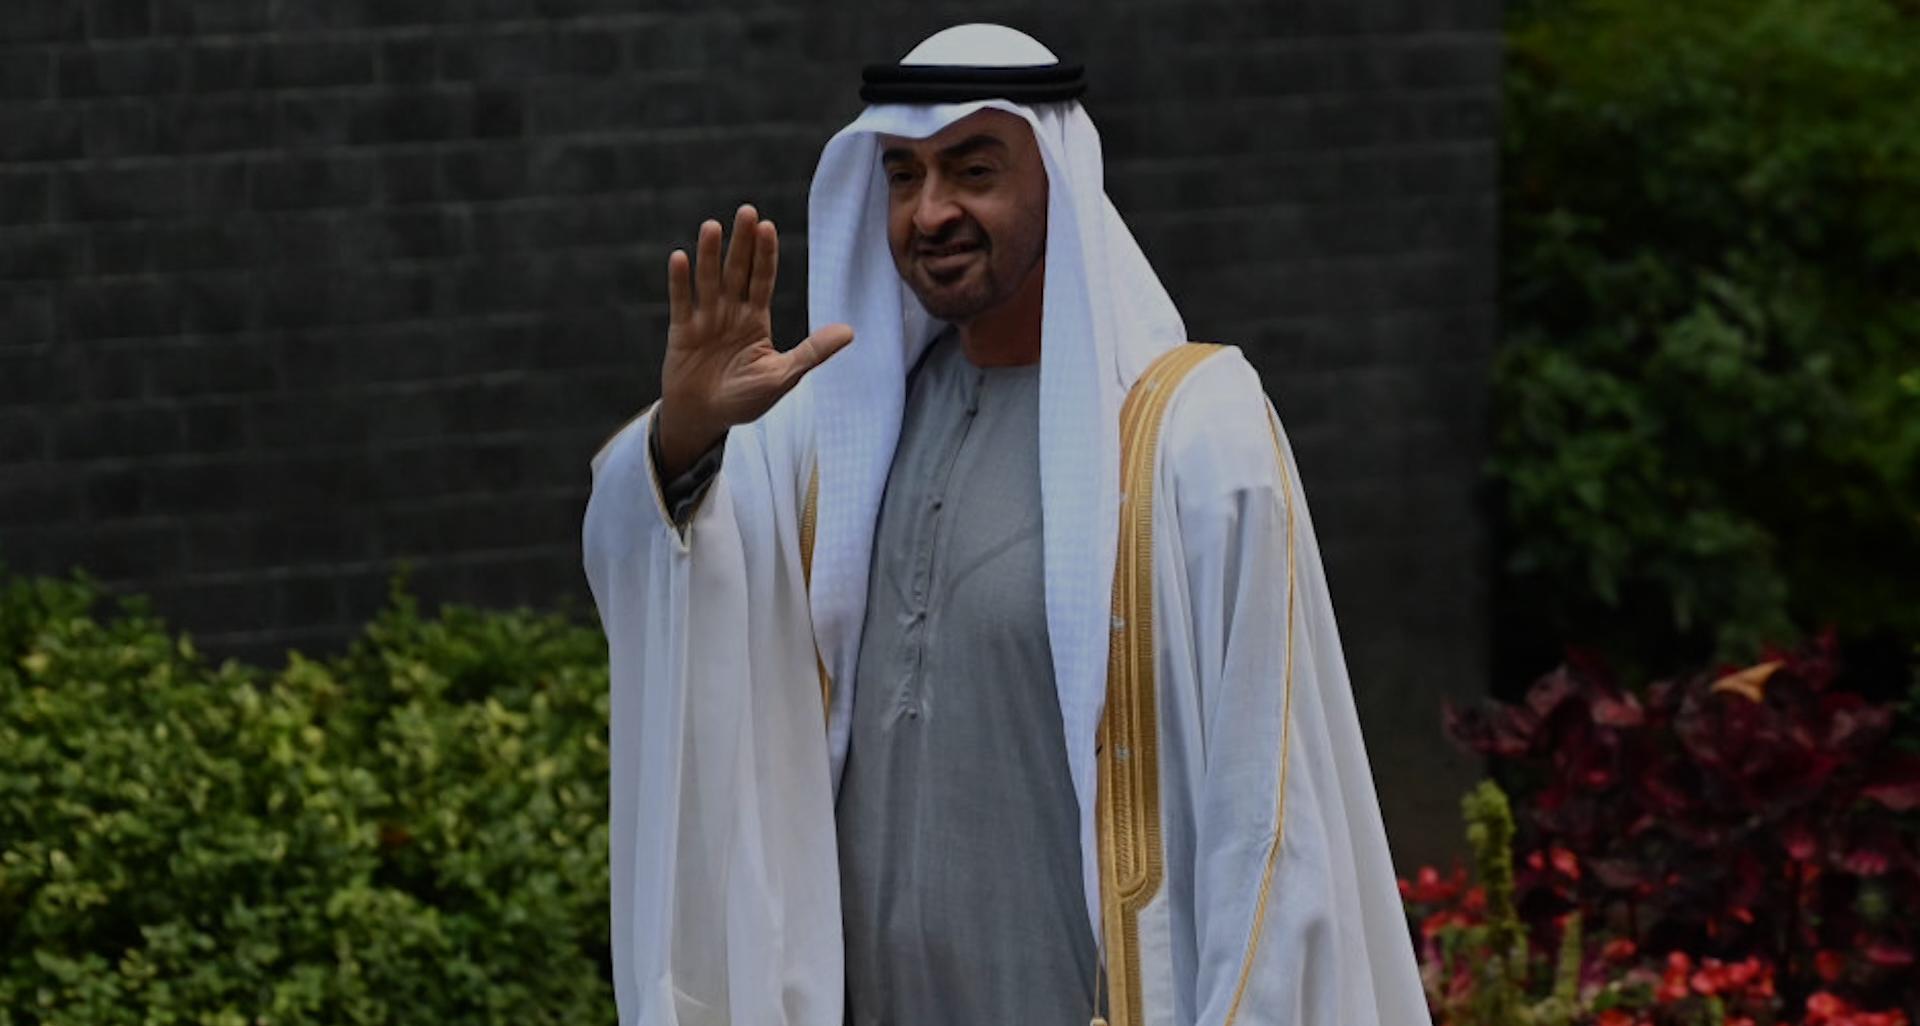 UAE's President restructures social welfare programme of low-income citizens